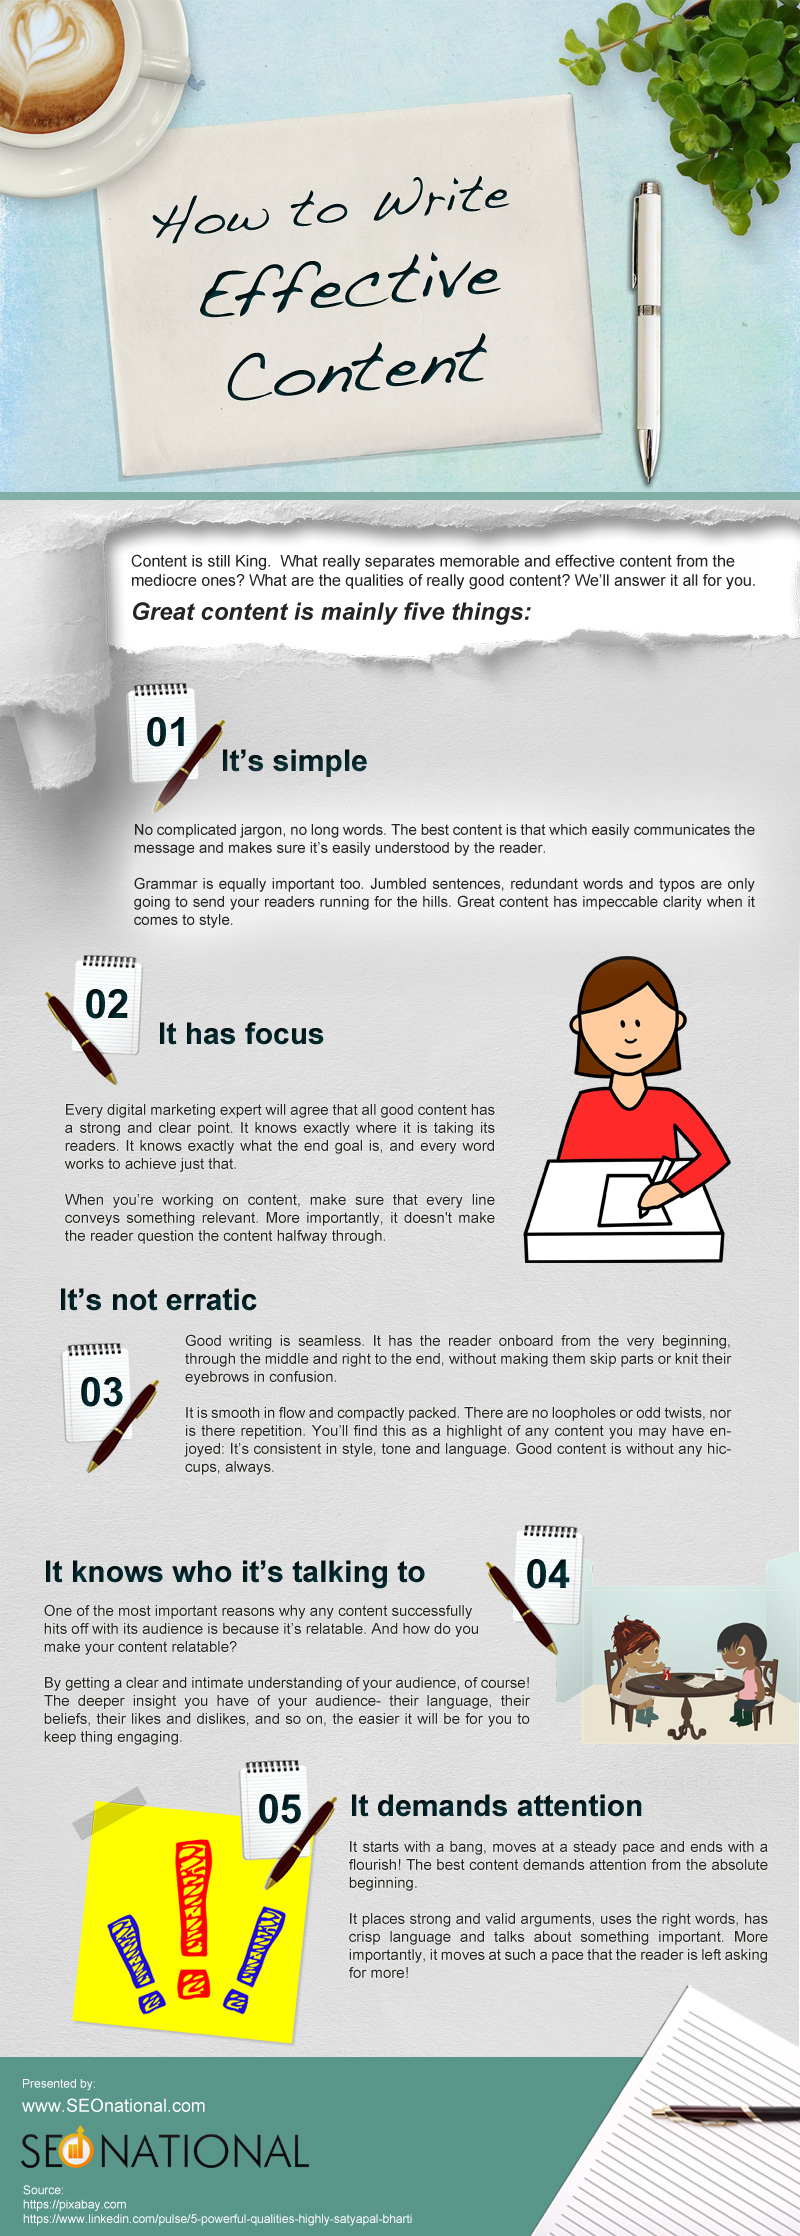 How to Write Effective Content [Infographic]